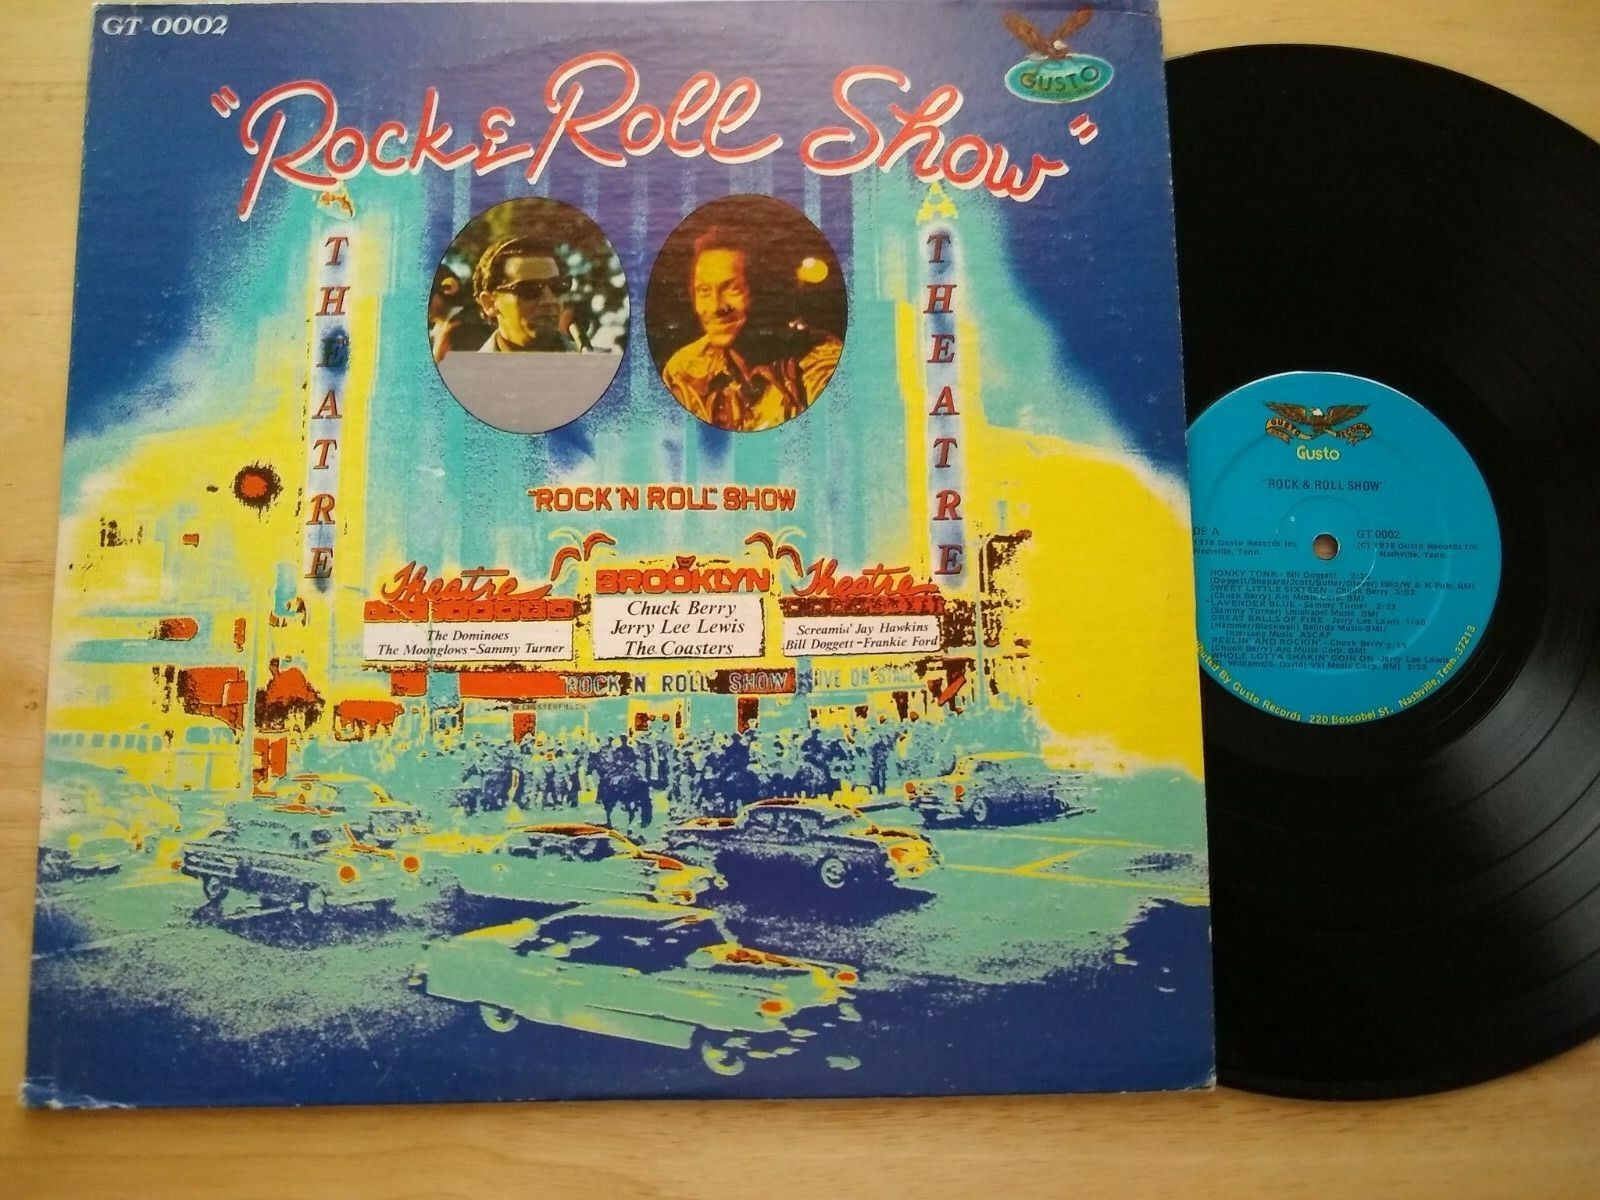 Rock & Roll Show LP - 1973-Gusto Records